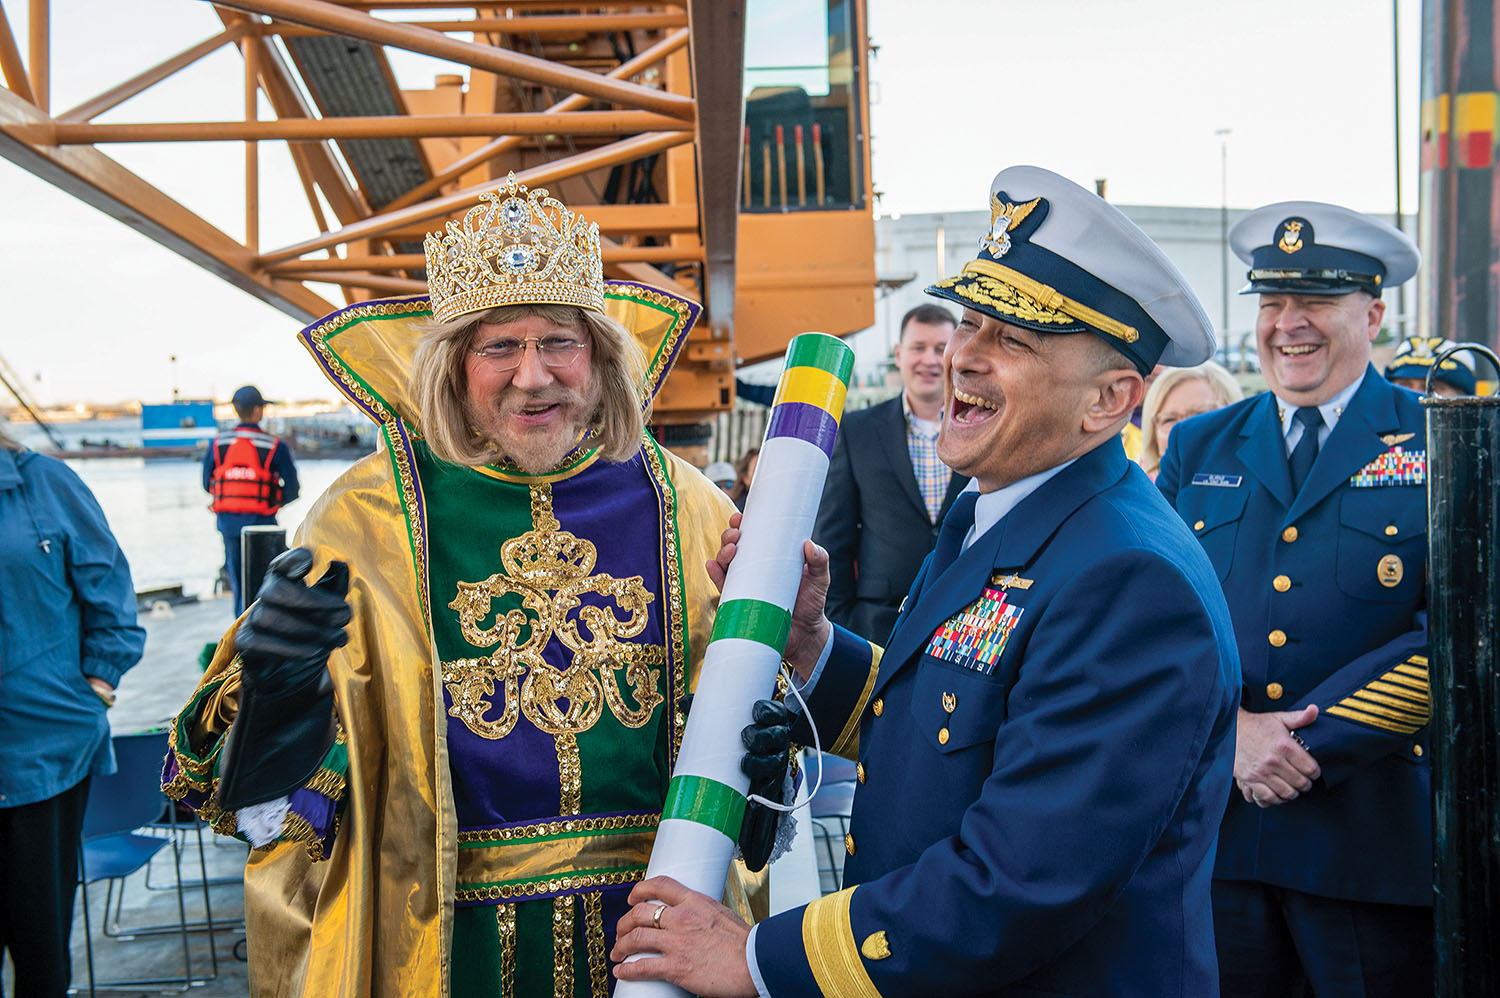 His Majesty the King of Carnival, John Eastman, presents a royal decree of appreciation to Rear Adm. David Barata, commander of the Eighth Coast Guard District, aboard the cutter Pamlico on February 12, known as “Lundi Gras” in New Orleans. (Photo courtesy of U.S. Coast Guard)